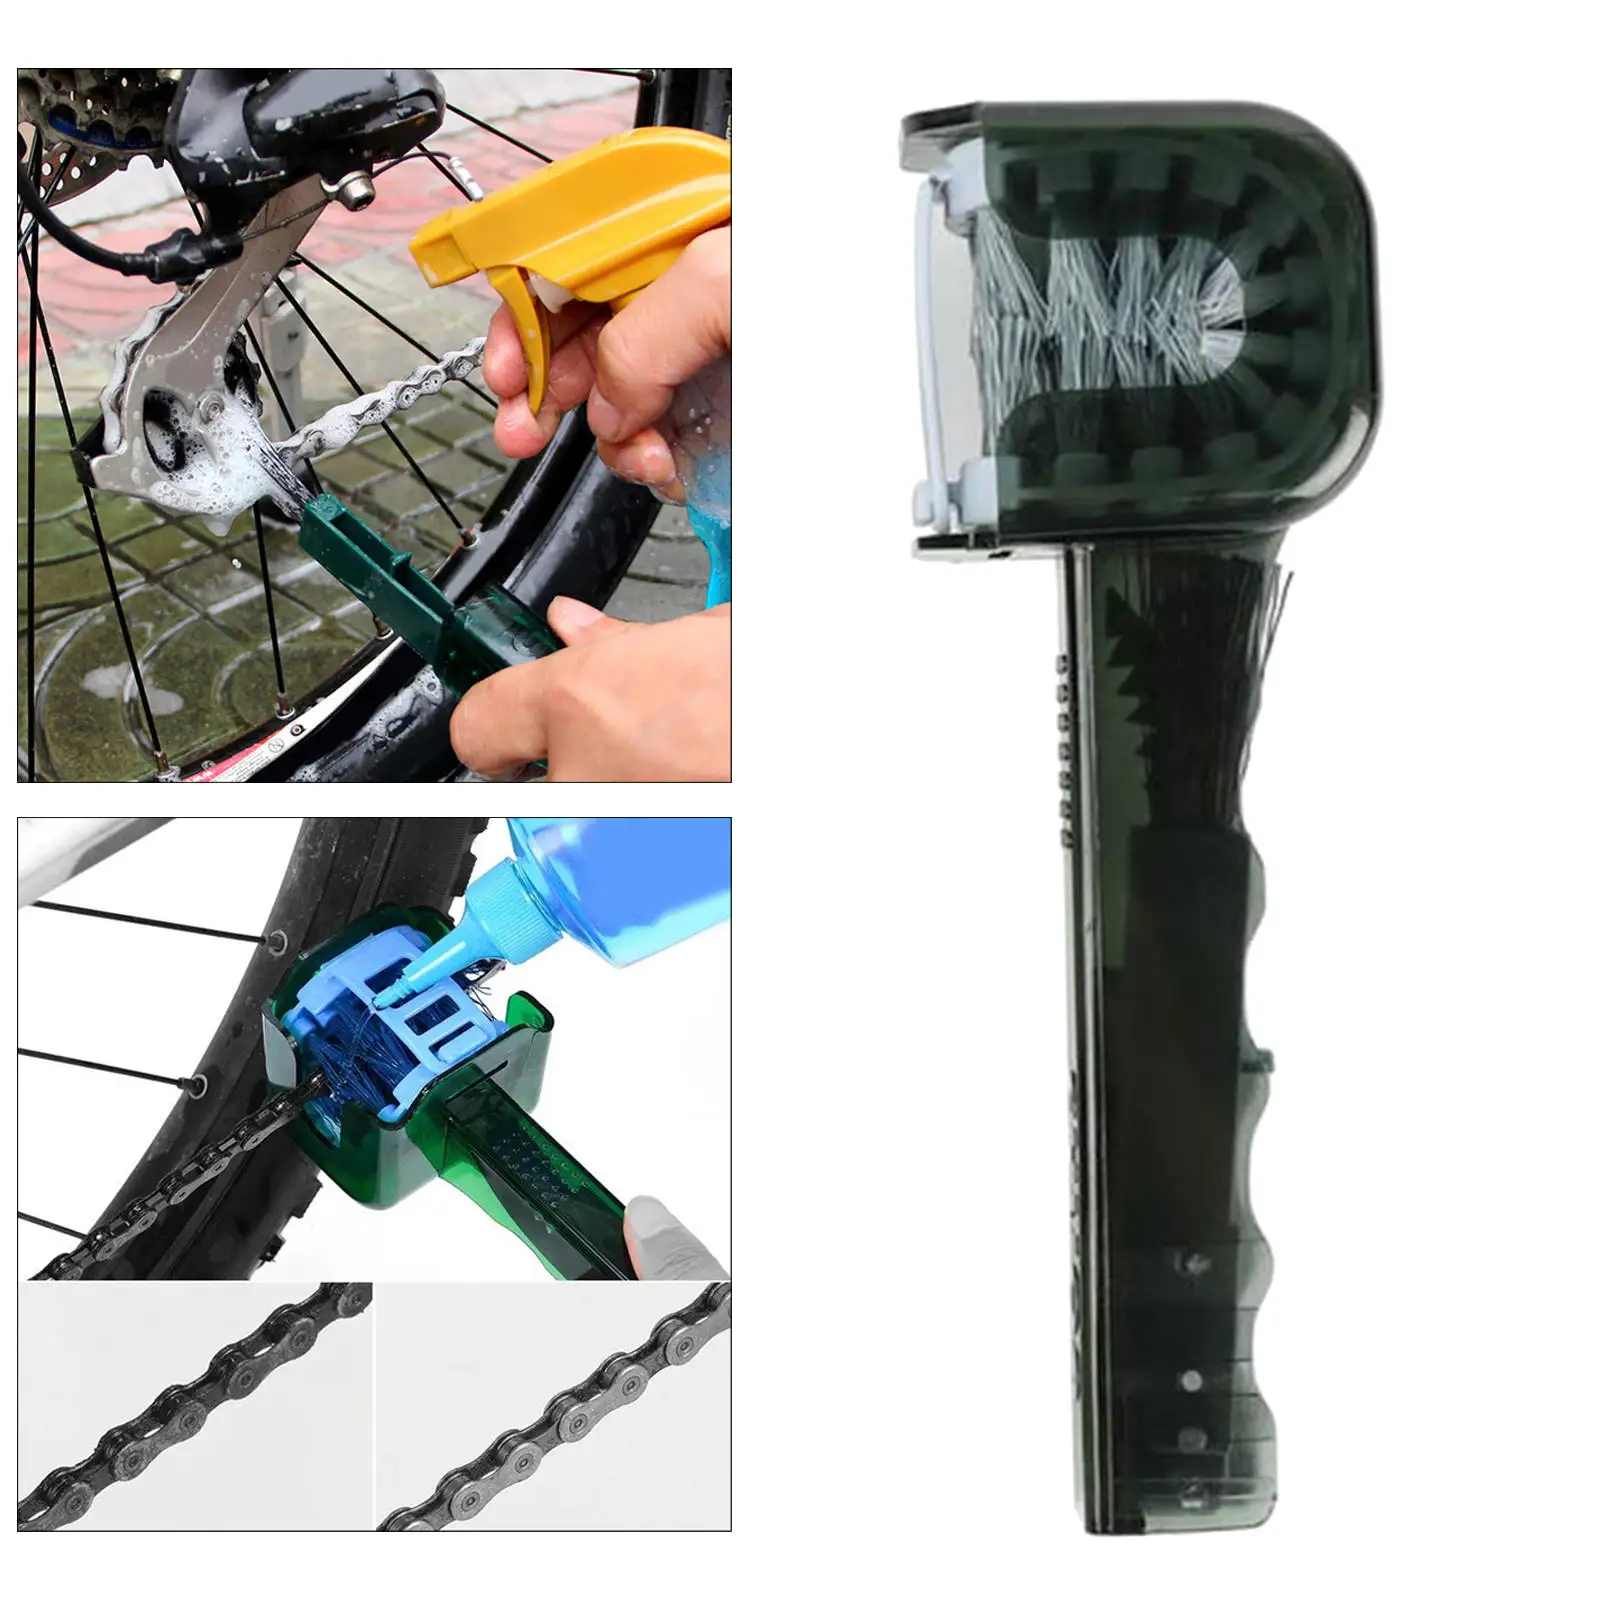 Mountain Cycling Cleaning Portable Bicycle Chain Cleaner Bike Brushes Wash Tool Cycling Cleaning Outdoor Accessories